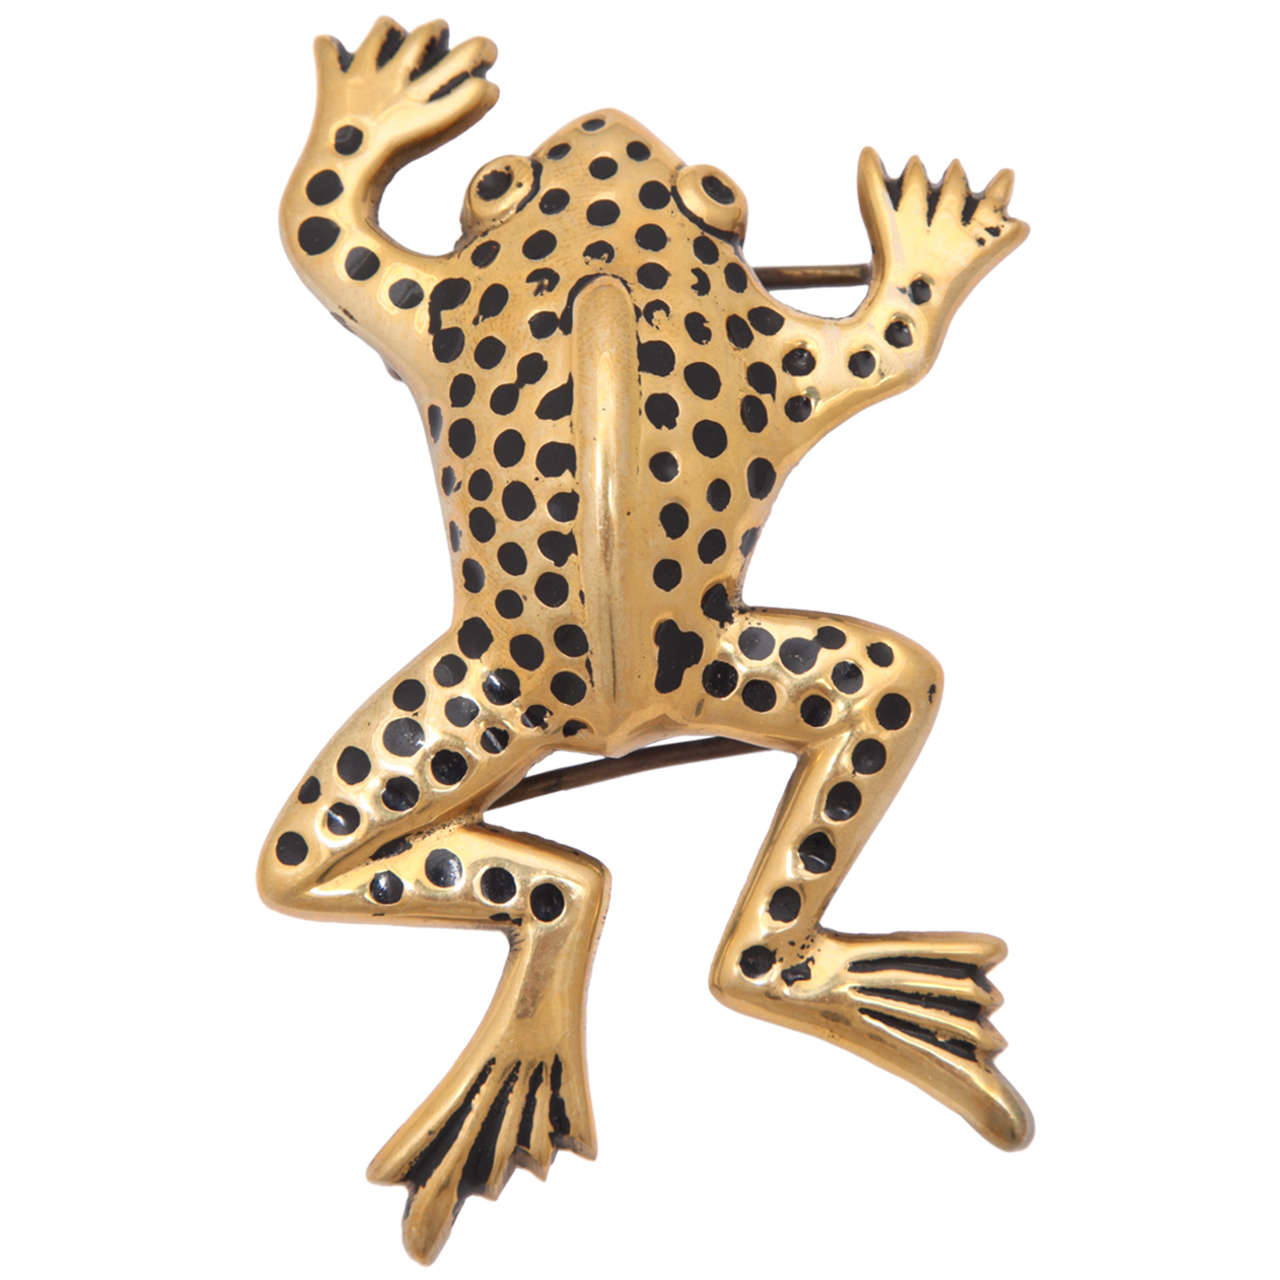 Large "Gold" Frog Belt Buckle, Costume Jewelry